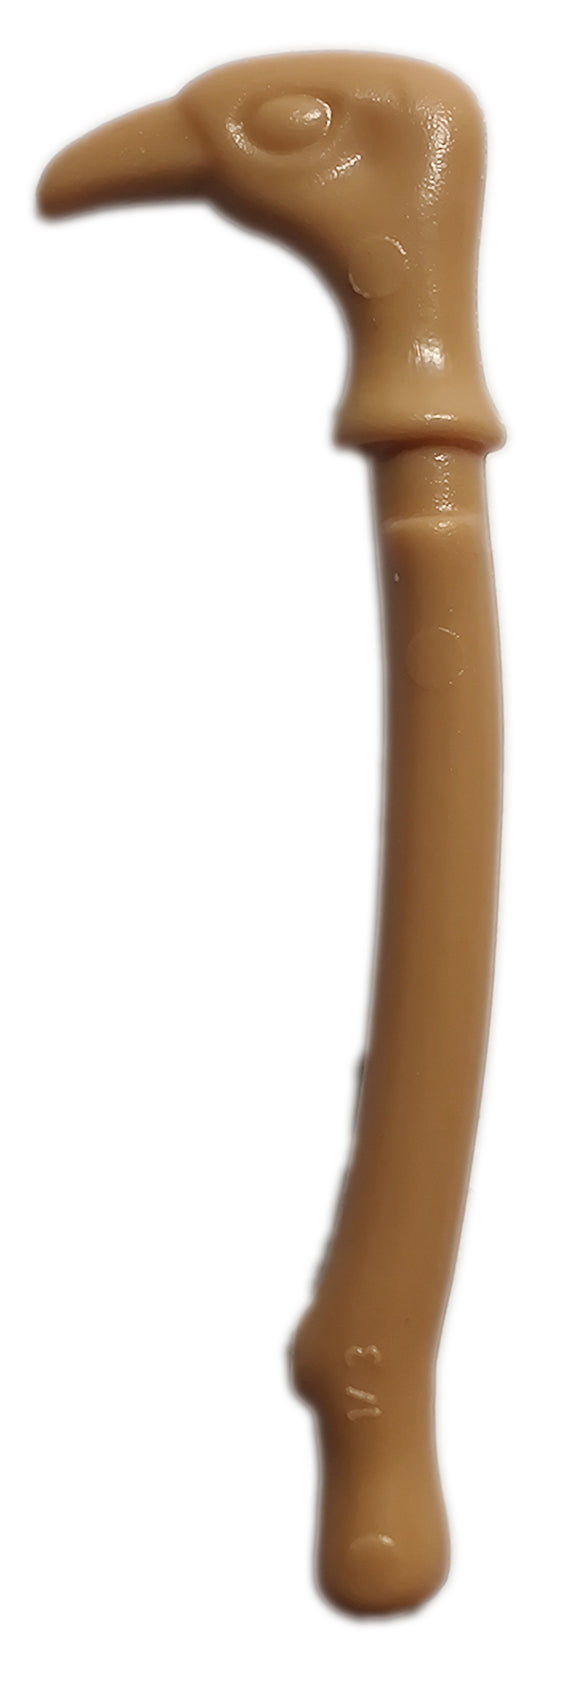 Playmobil 30 20 6180 Native American Stick, carved with eagle head